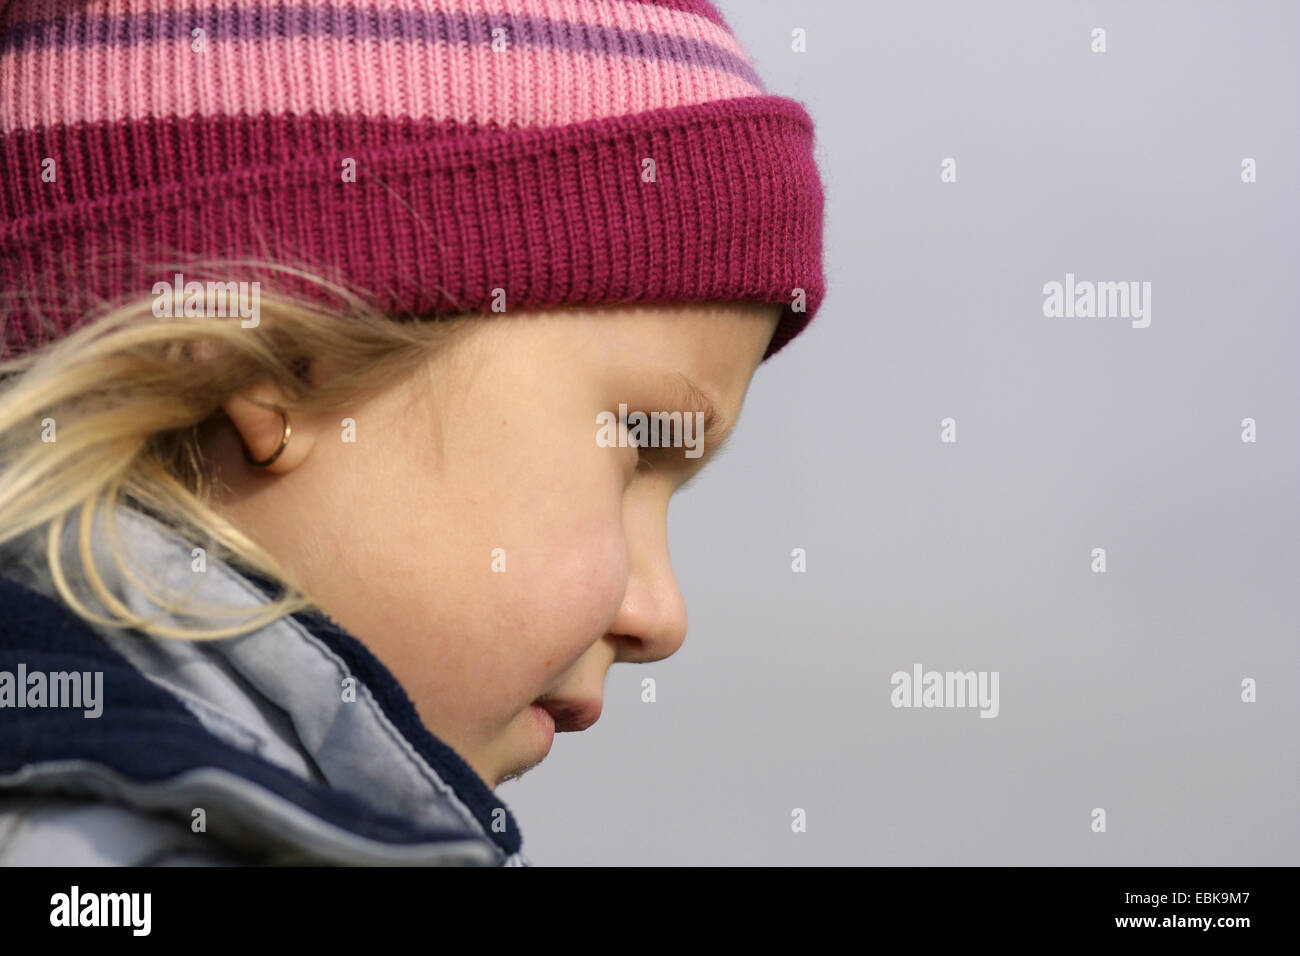 portrait of a little girls with woolen hat Stock Photo